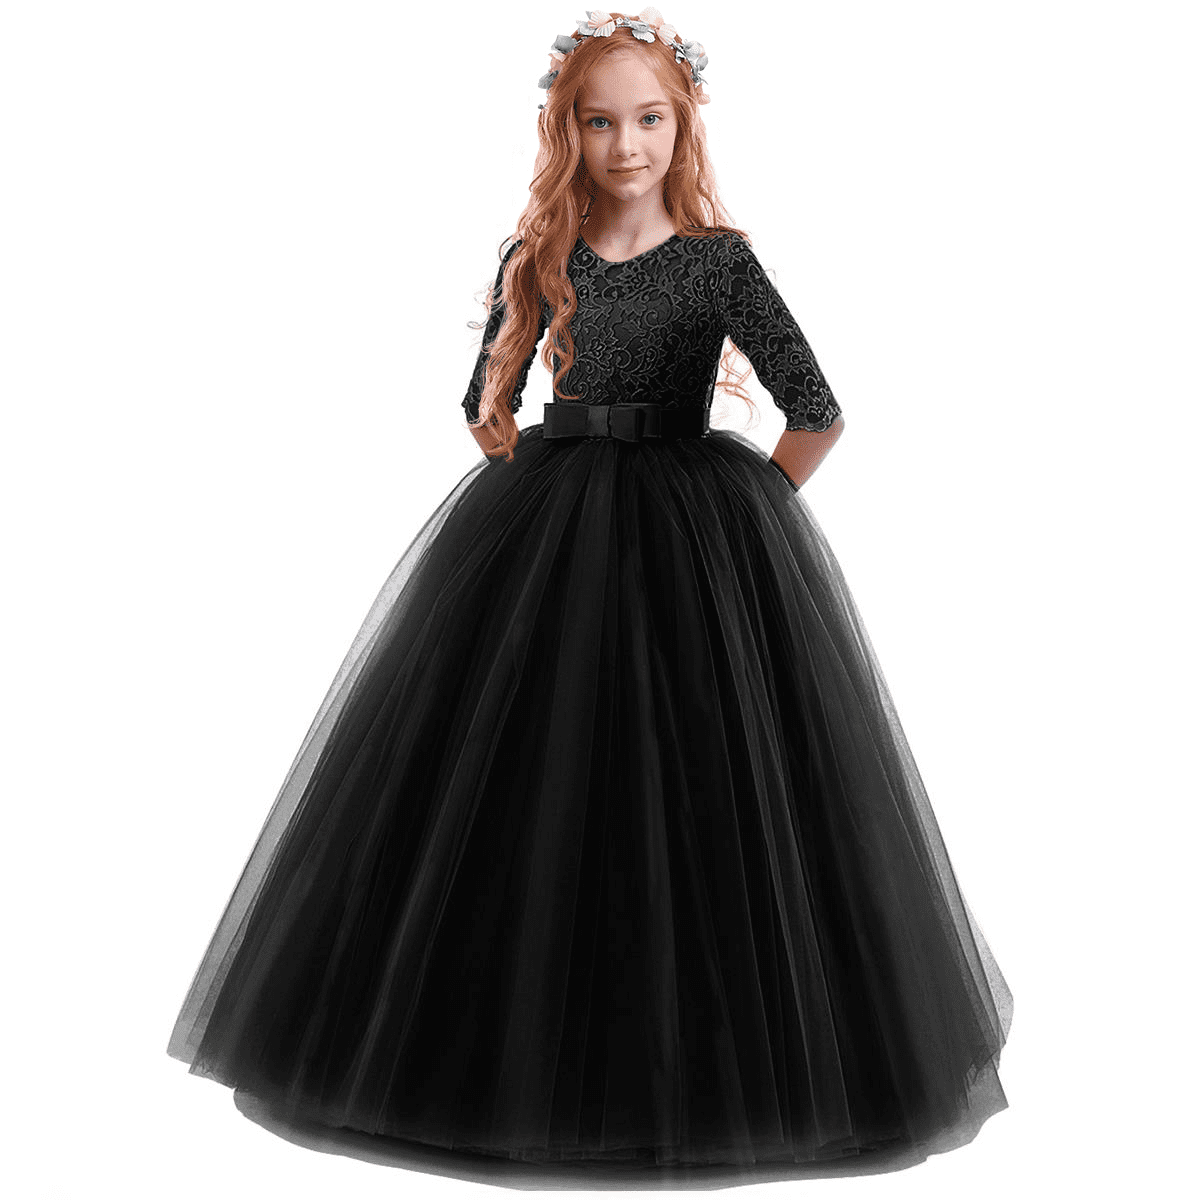 Girls Luxury Party Dress Kids Elegant Black Lace Princess Gown Long Dress  Wedding Even Piano Performance Clothes - Girls Party Dresses - AliExpress